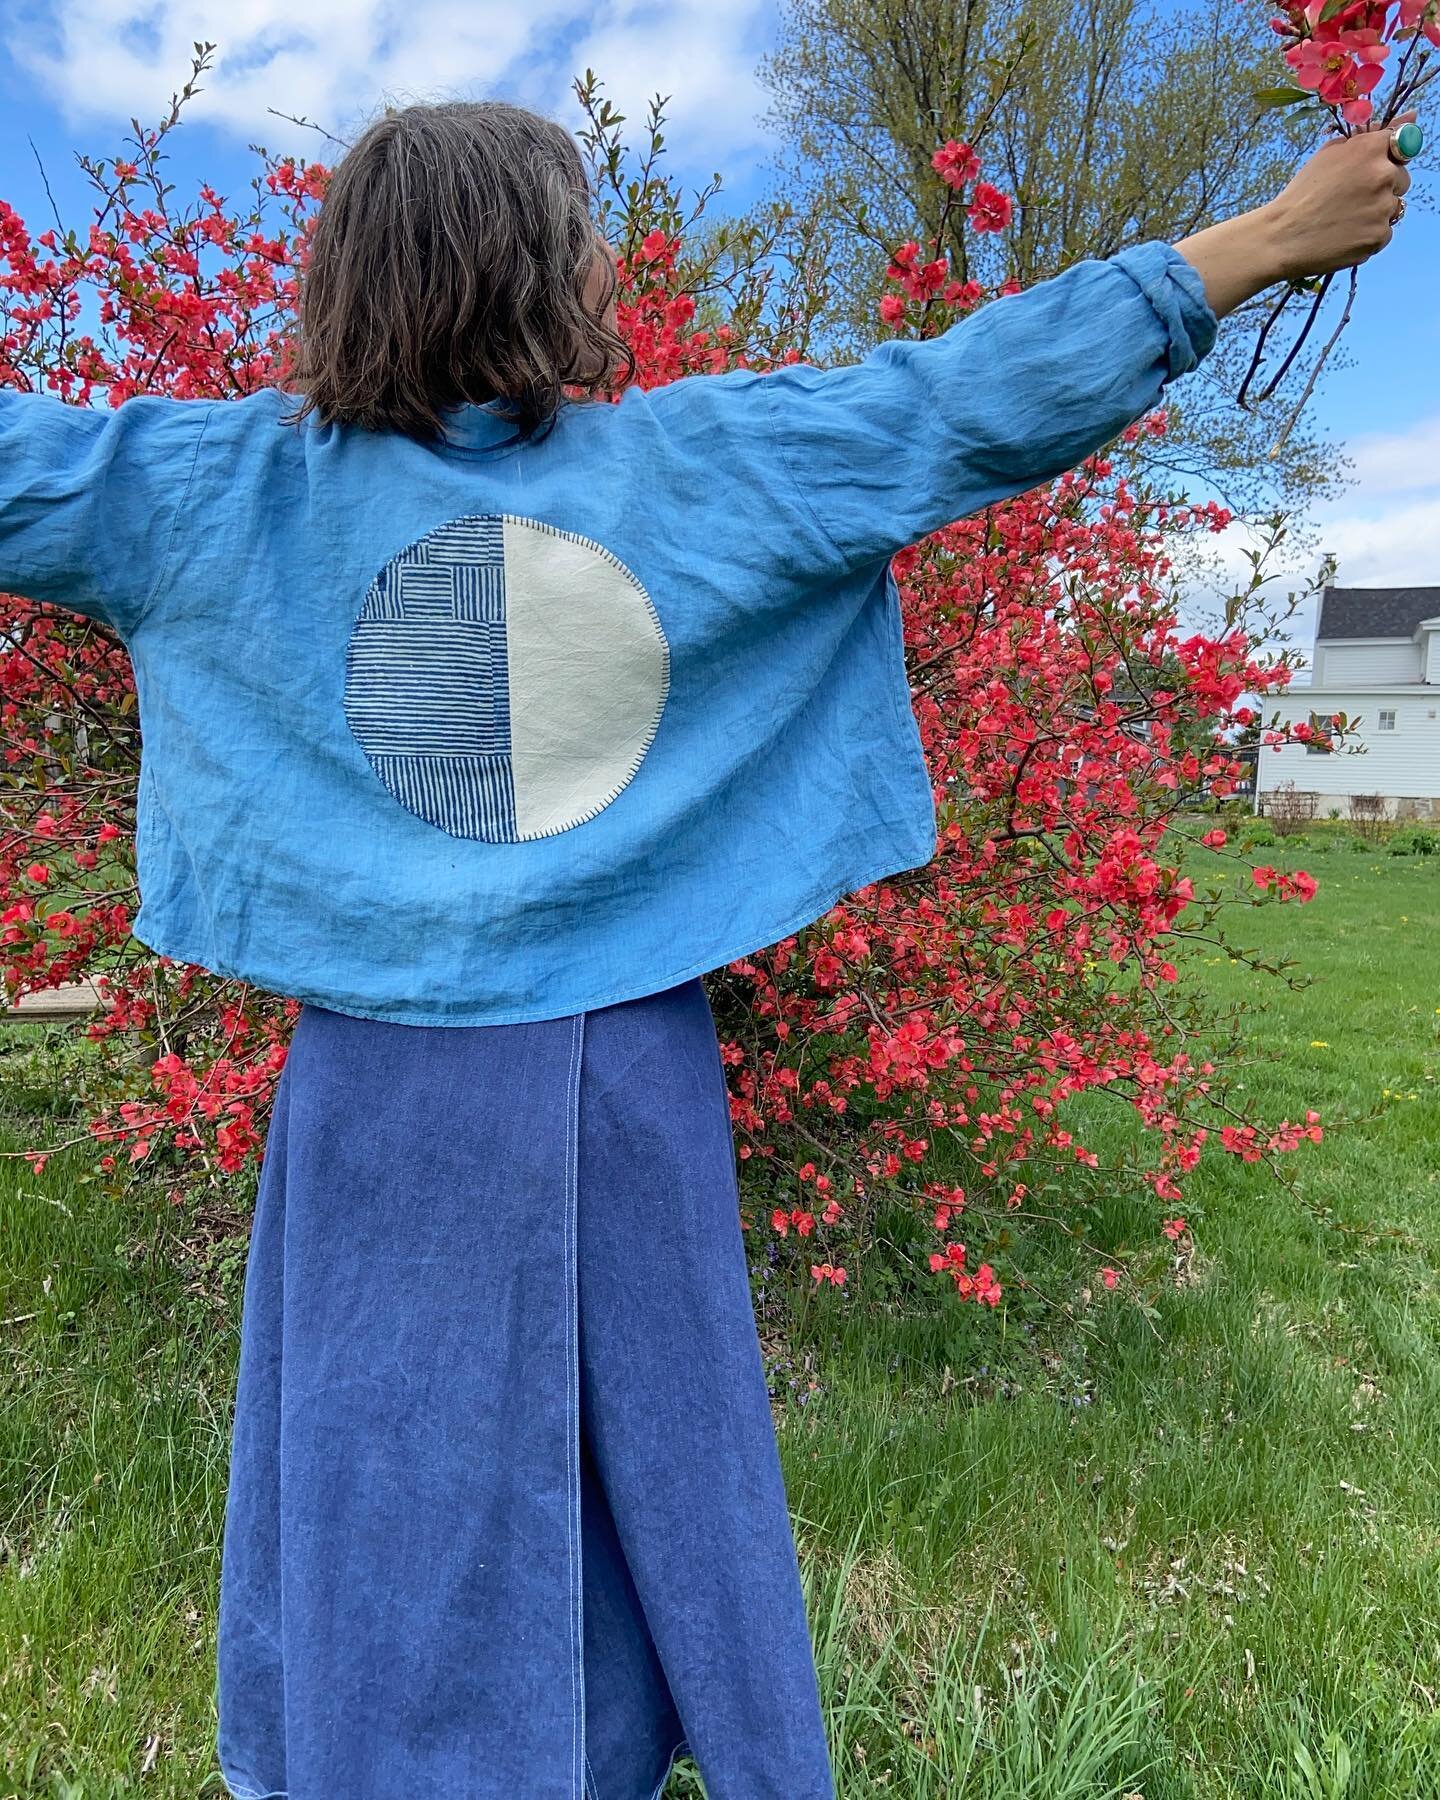 Moon Mending: This secondhand jacket needed an update and so a massive moon appliqu&eacute; was my answer. It was so much fun to create the patchwork from tiny fabric scraps and play around with design elements like line, space, shape, and value. And